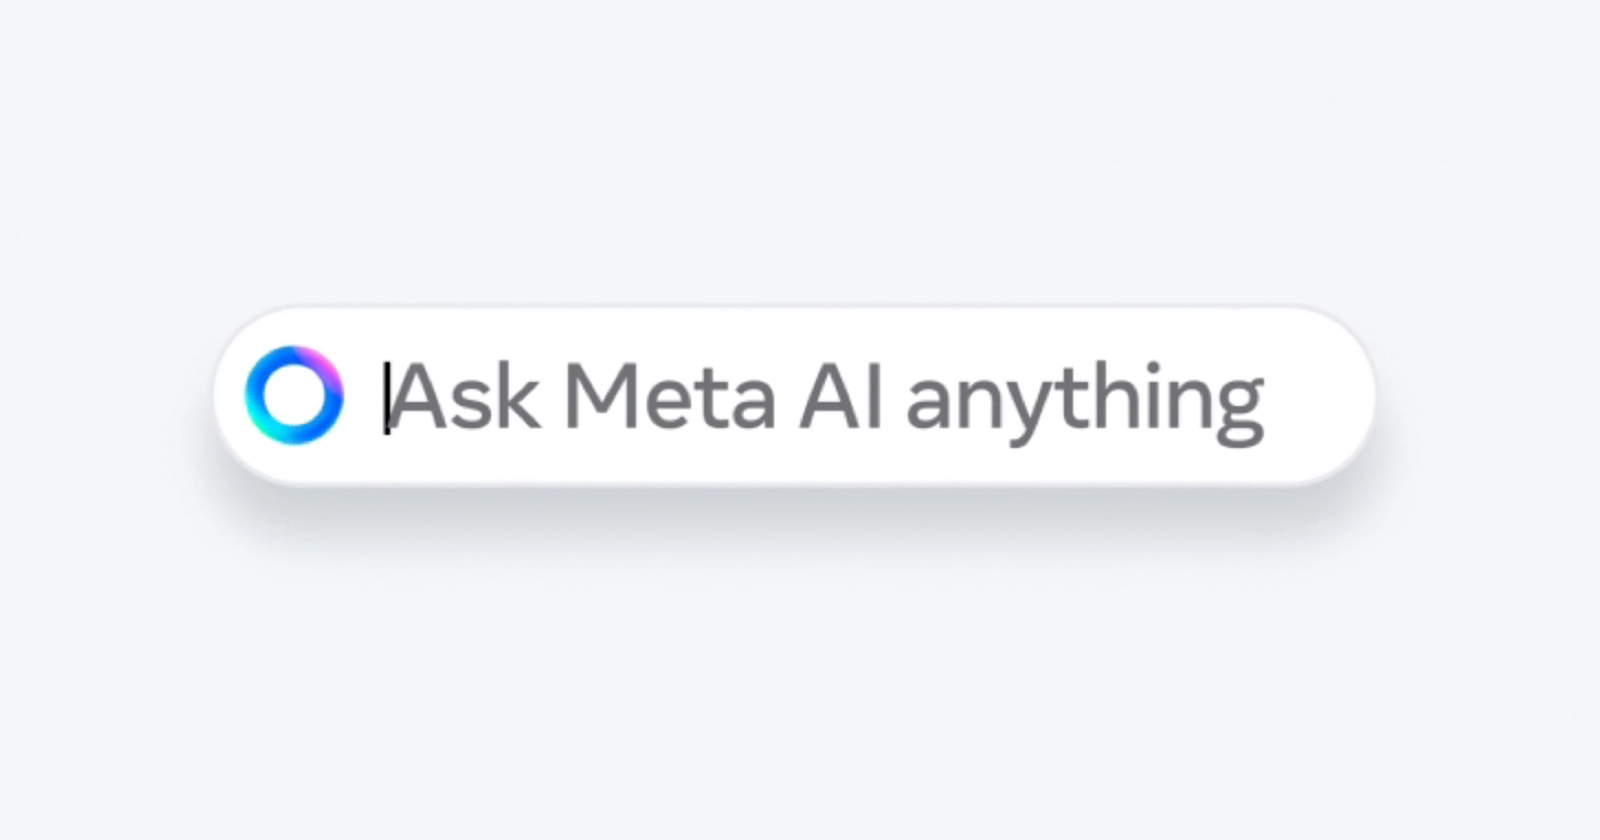 A search bar on a plain white background with the text "ask AI Assistant anything" next to a colorful circular logo.